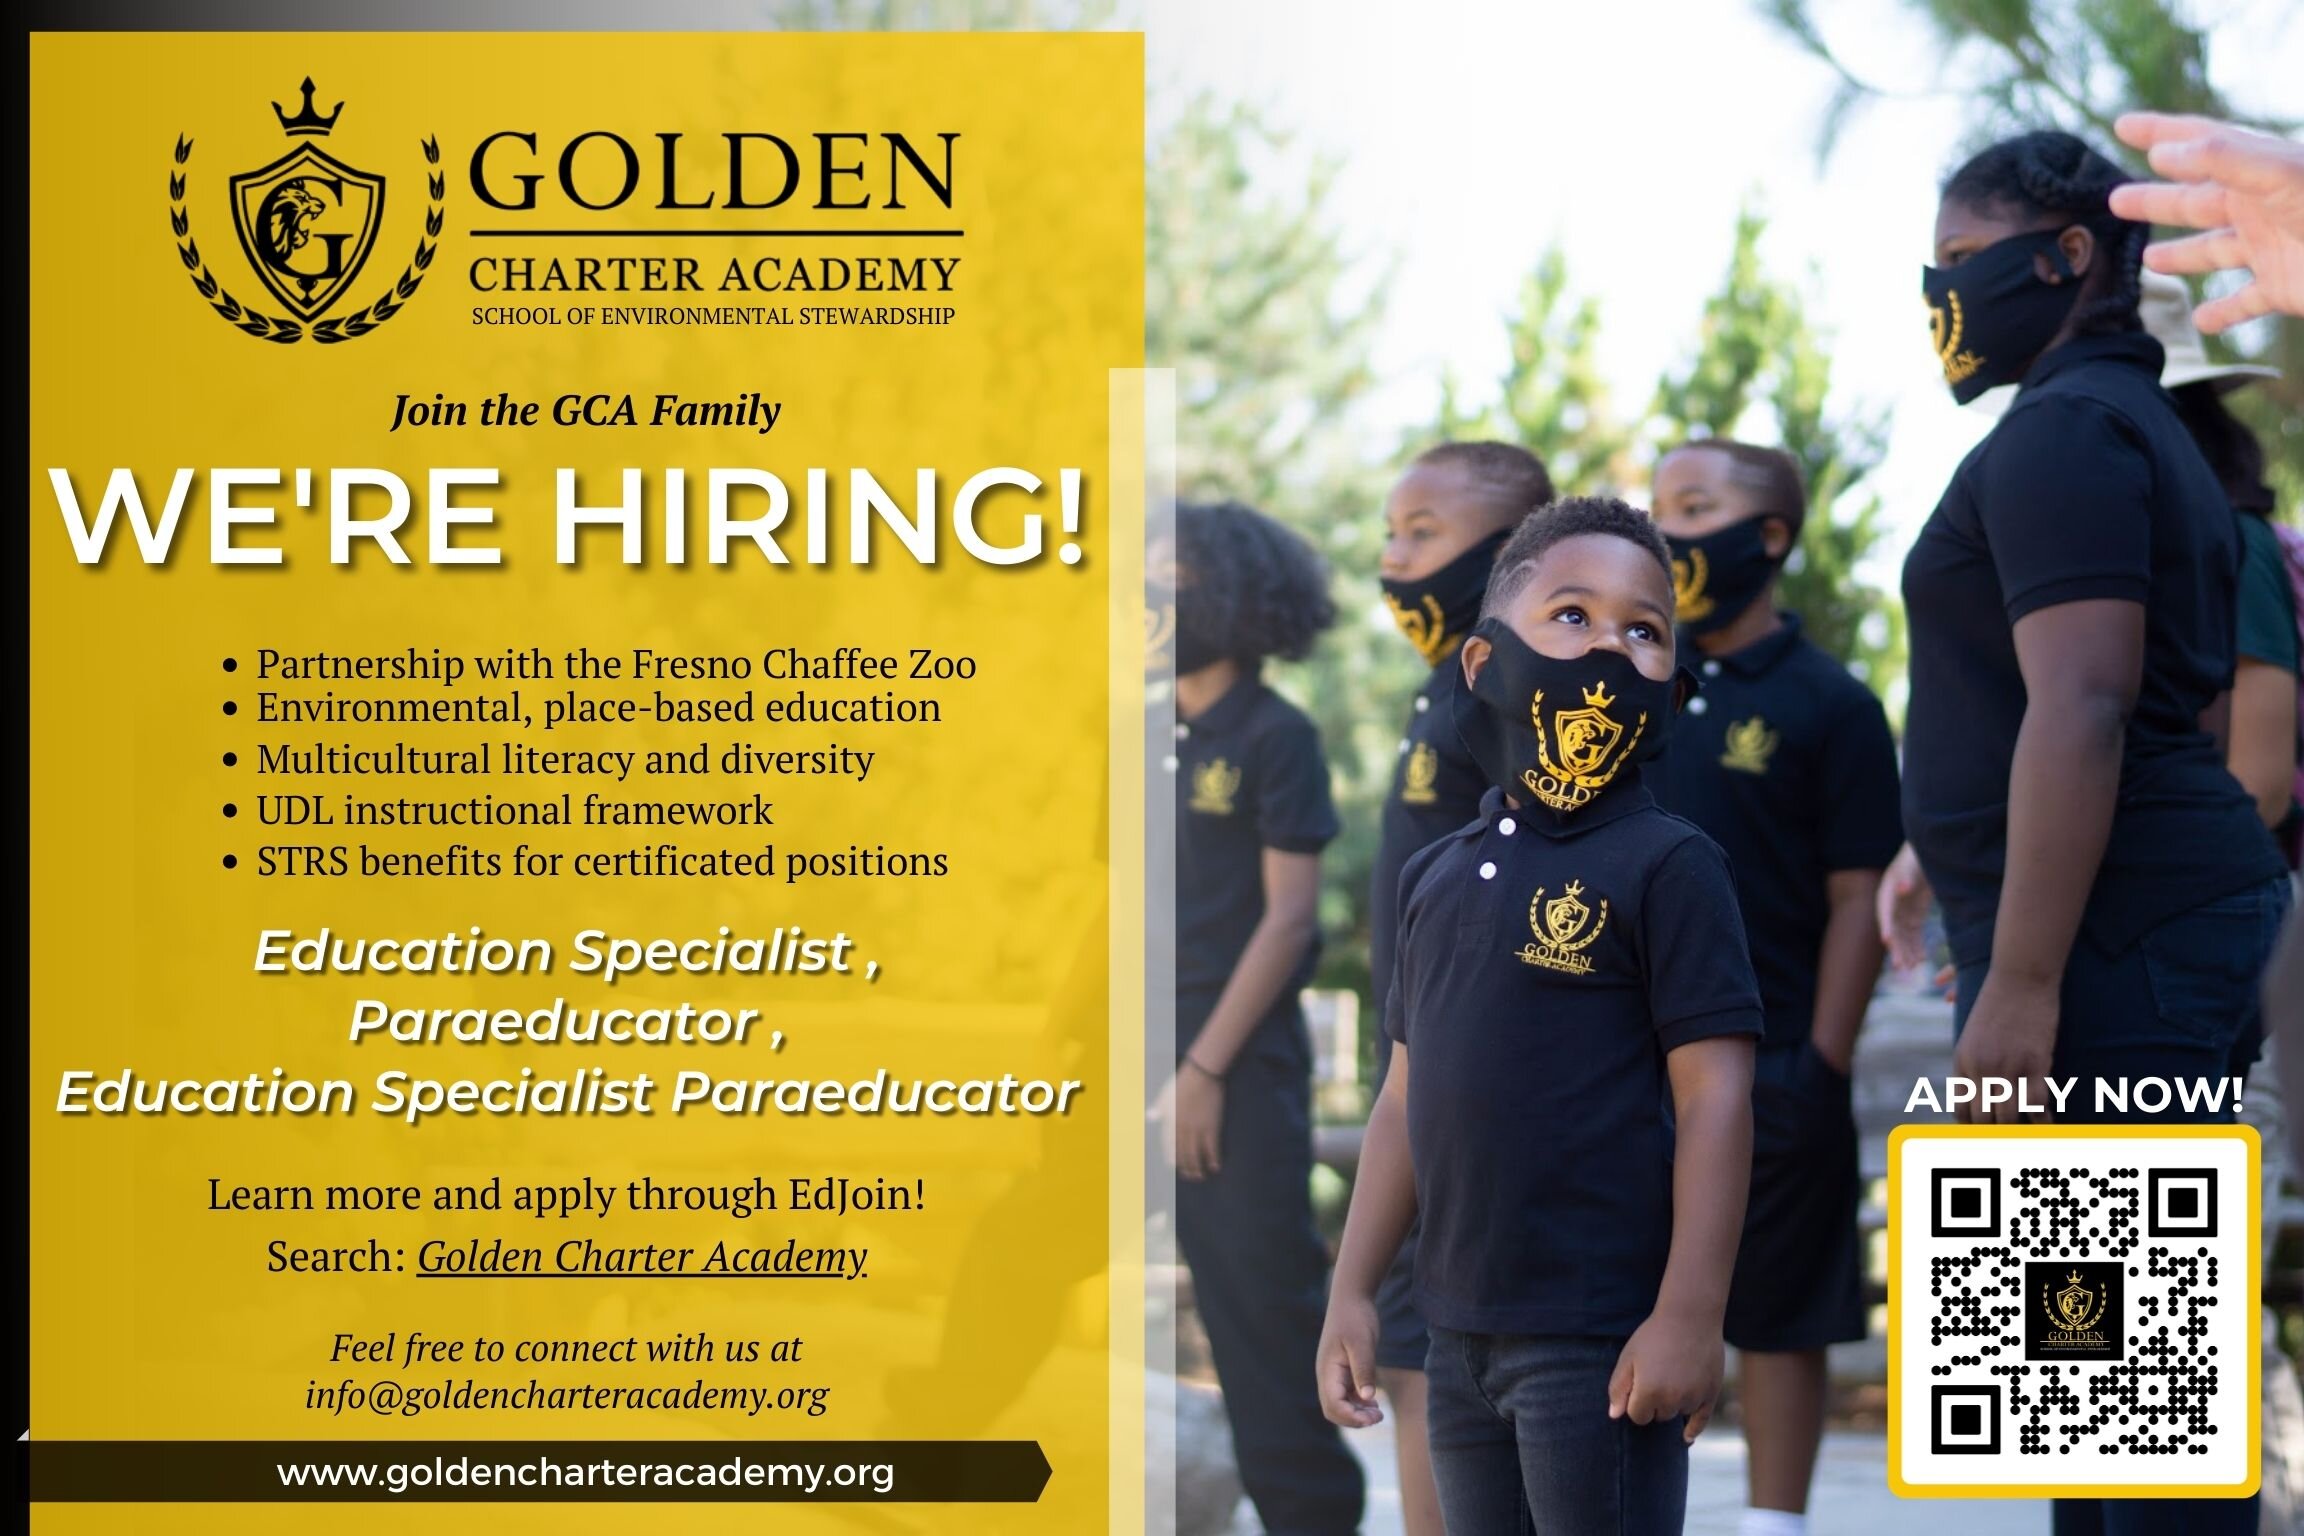 Scan the QR Code or click the button below to see new job listings available at Golden Charter Academy.